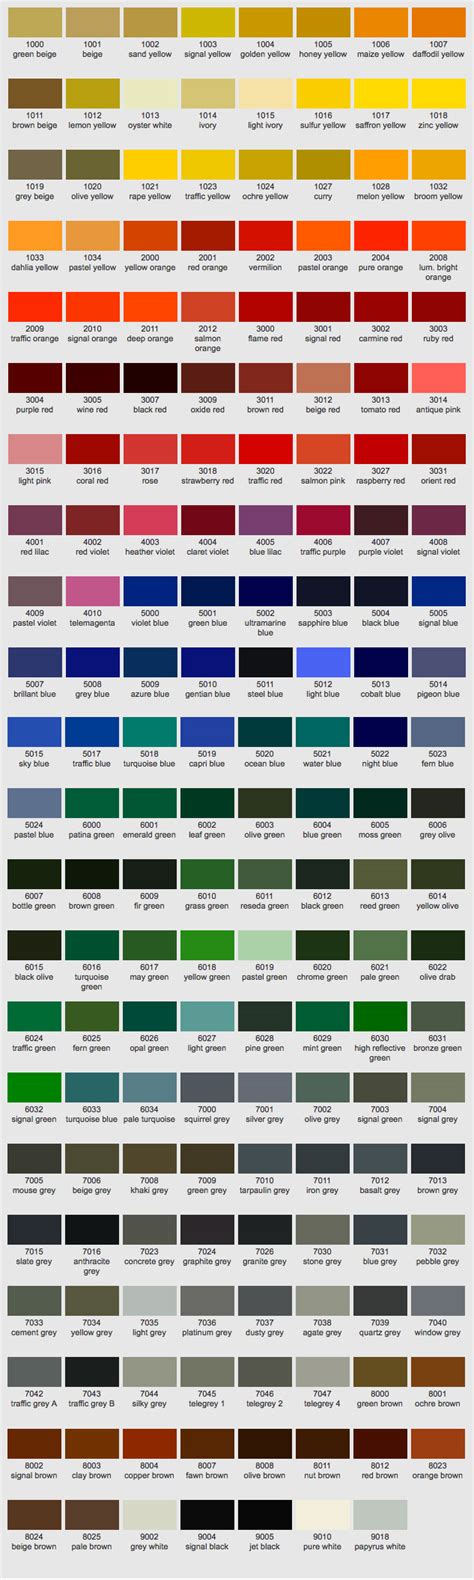 Ral Chart Ideas Ral Colour Chart Ral Colours Ral Color Chart Porn My